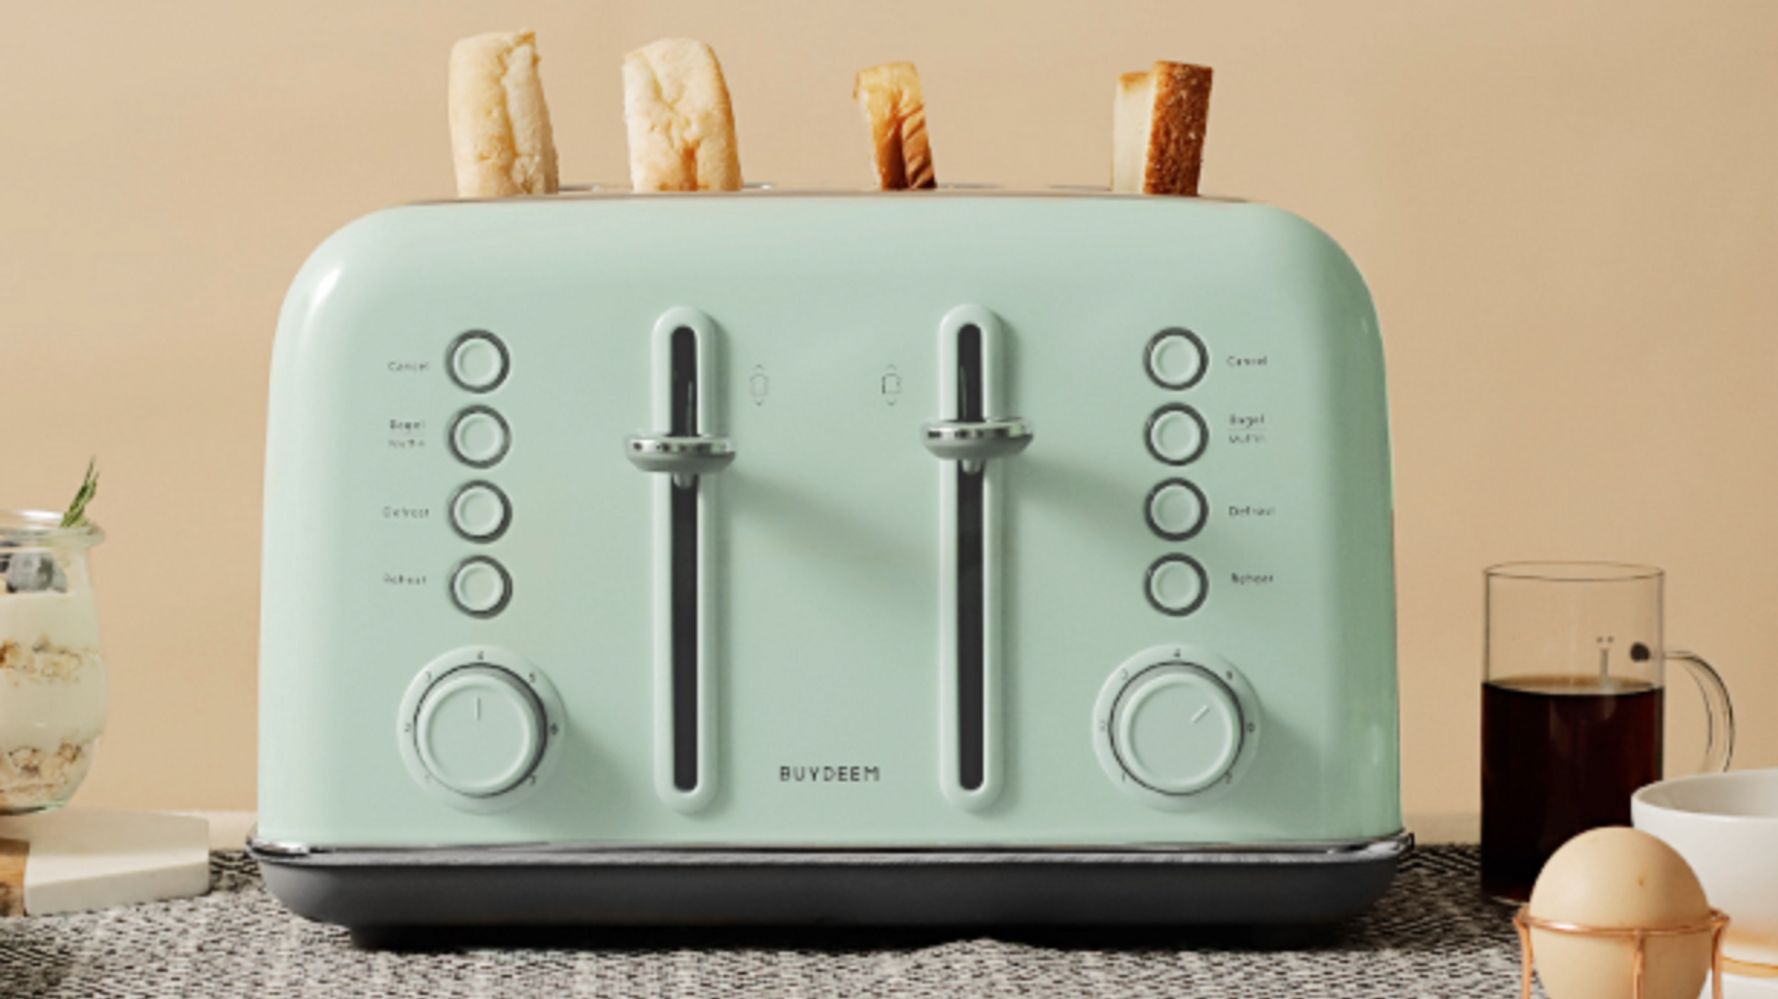 21 Kitchen Products That Are Not Only Effective, But Incredibly Pretty